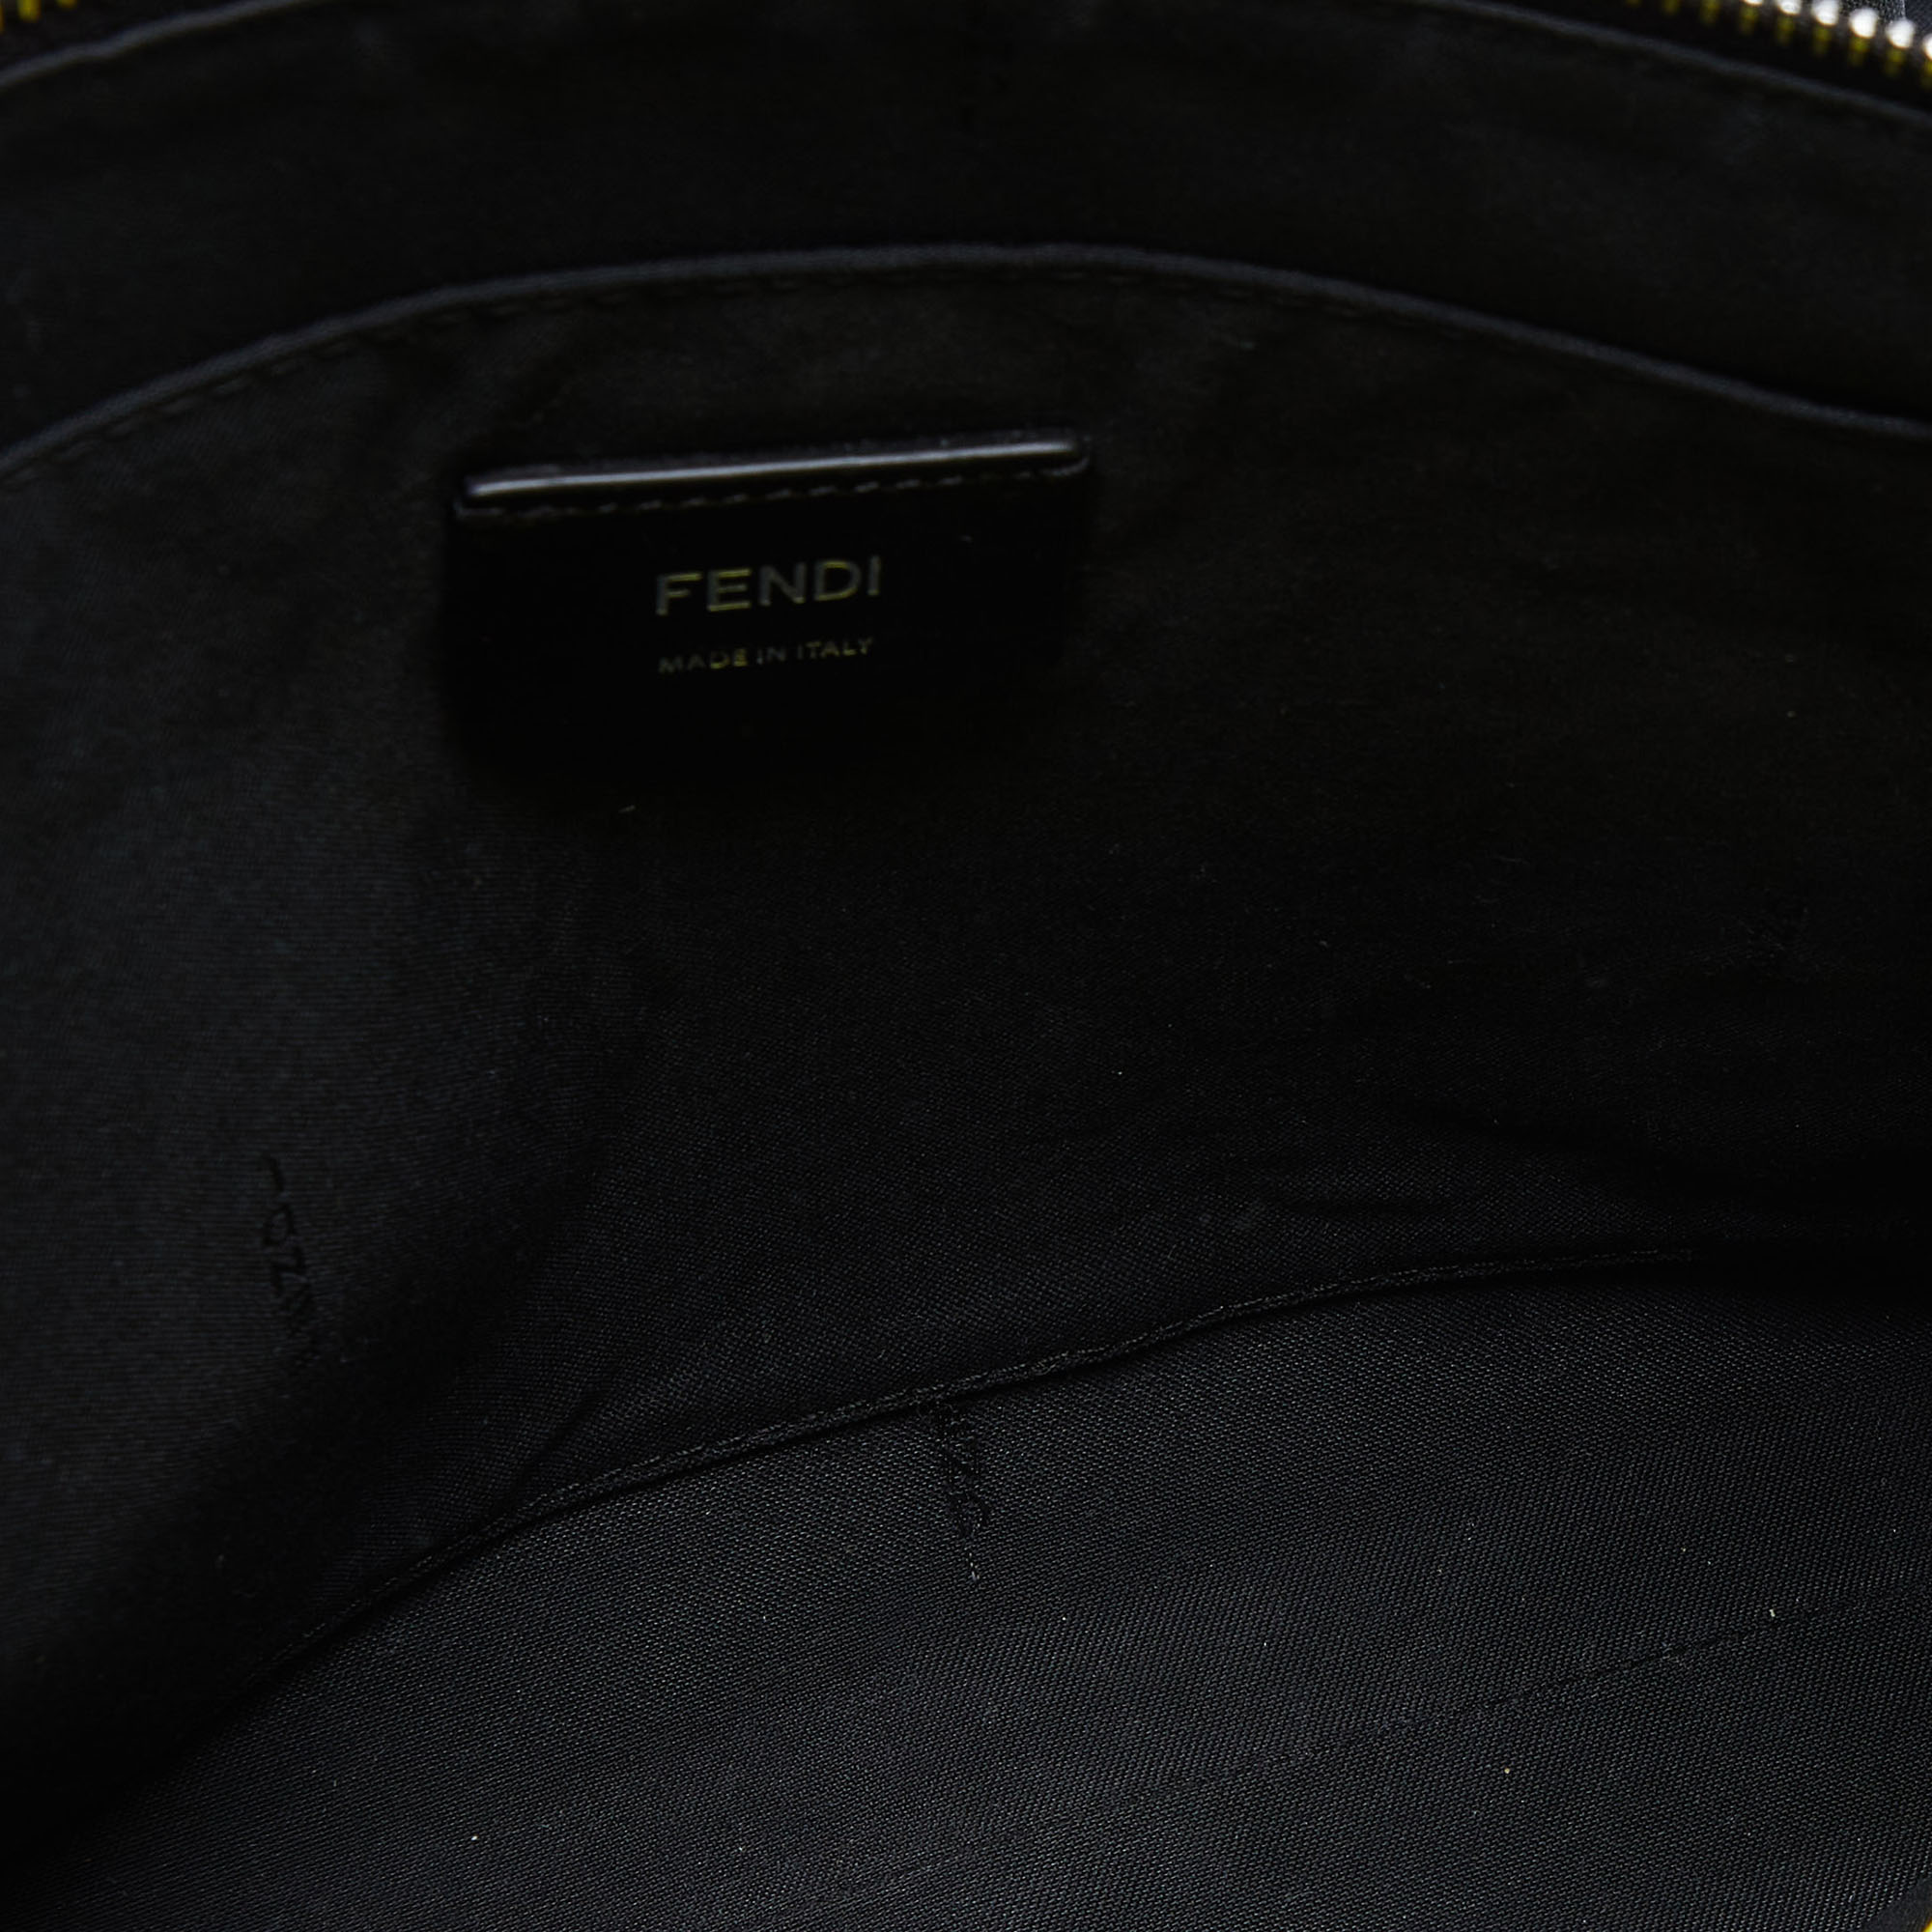 Fendi Yellow/Black Leather Monster Eyes Zip Pouch